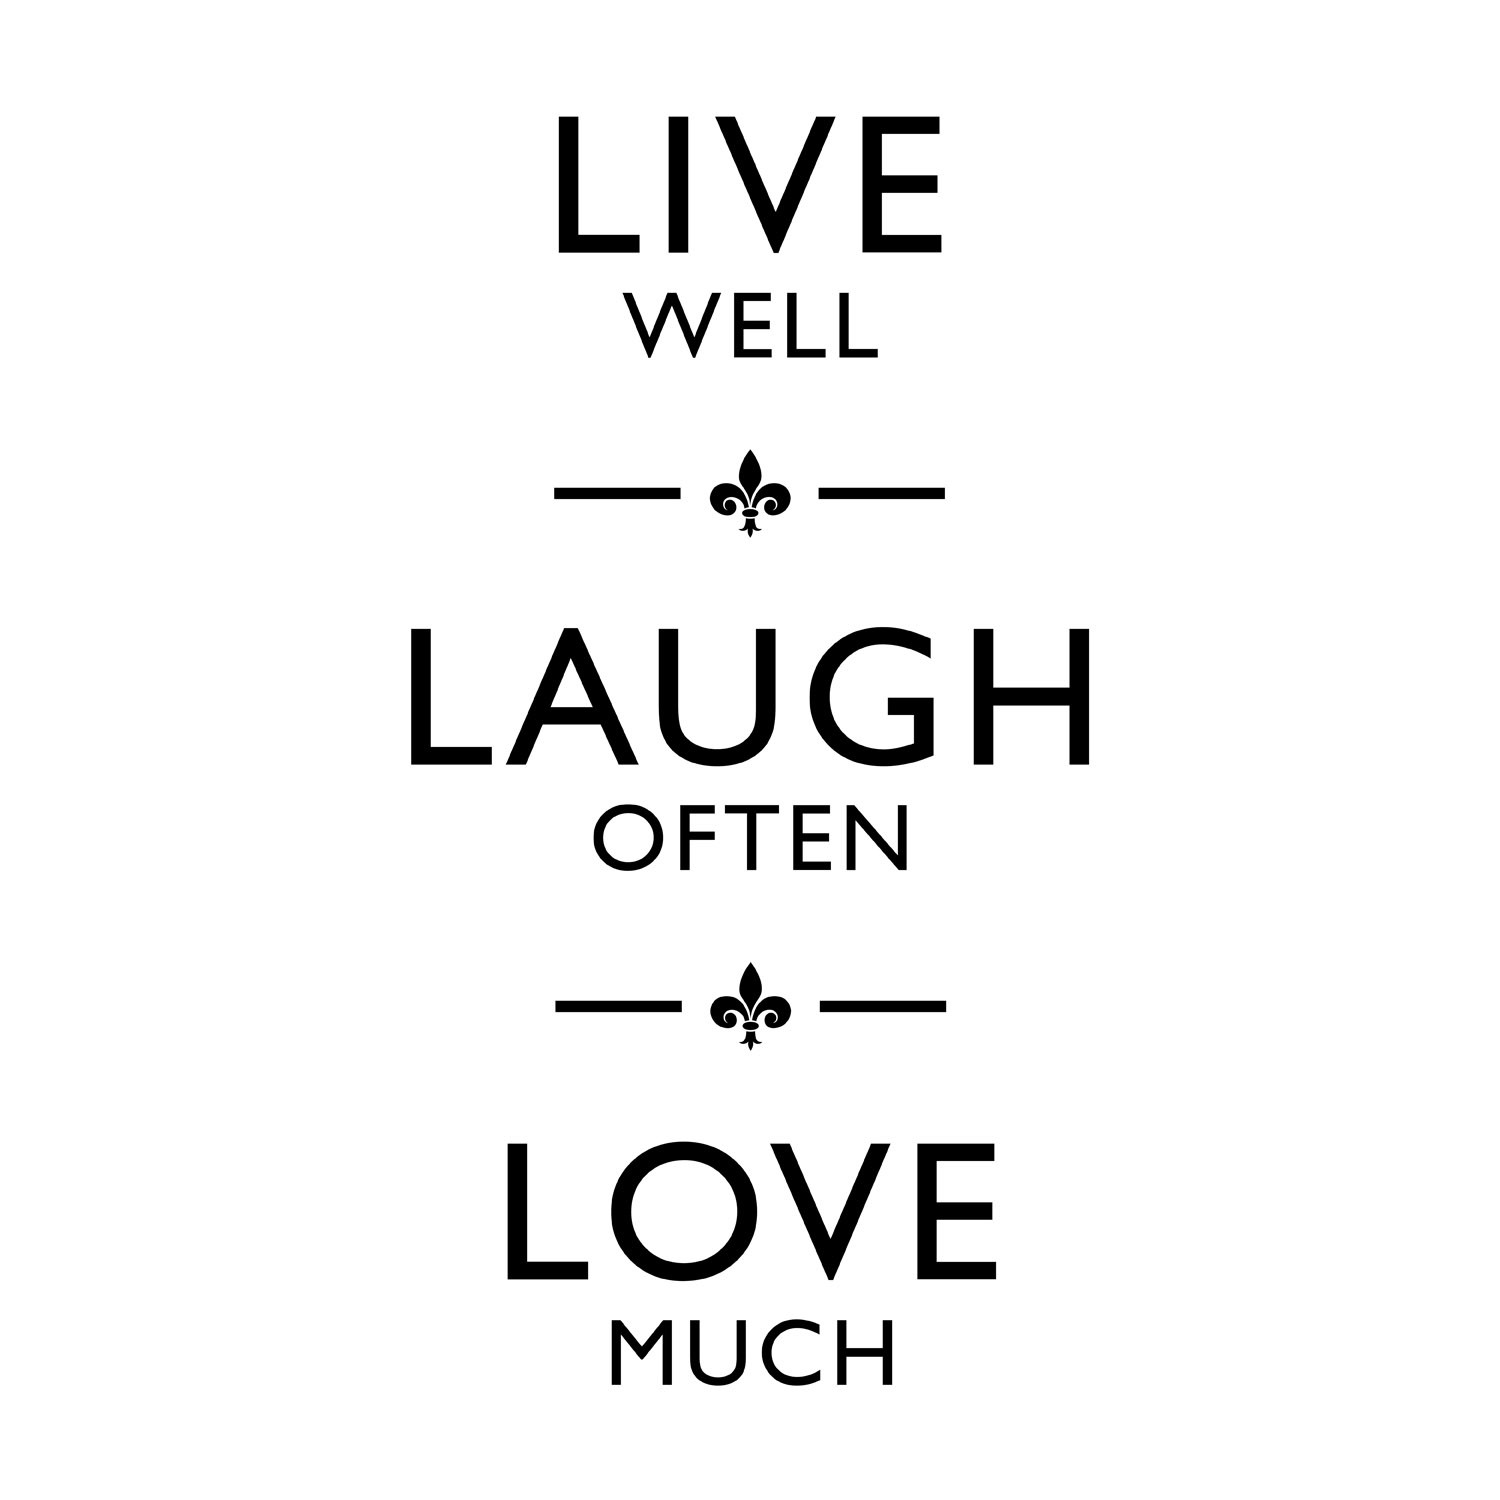 live laugh love quote wall sticker decal 2 Live well laugh often love much Advertisements